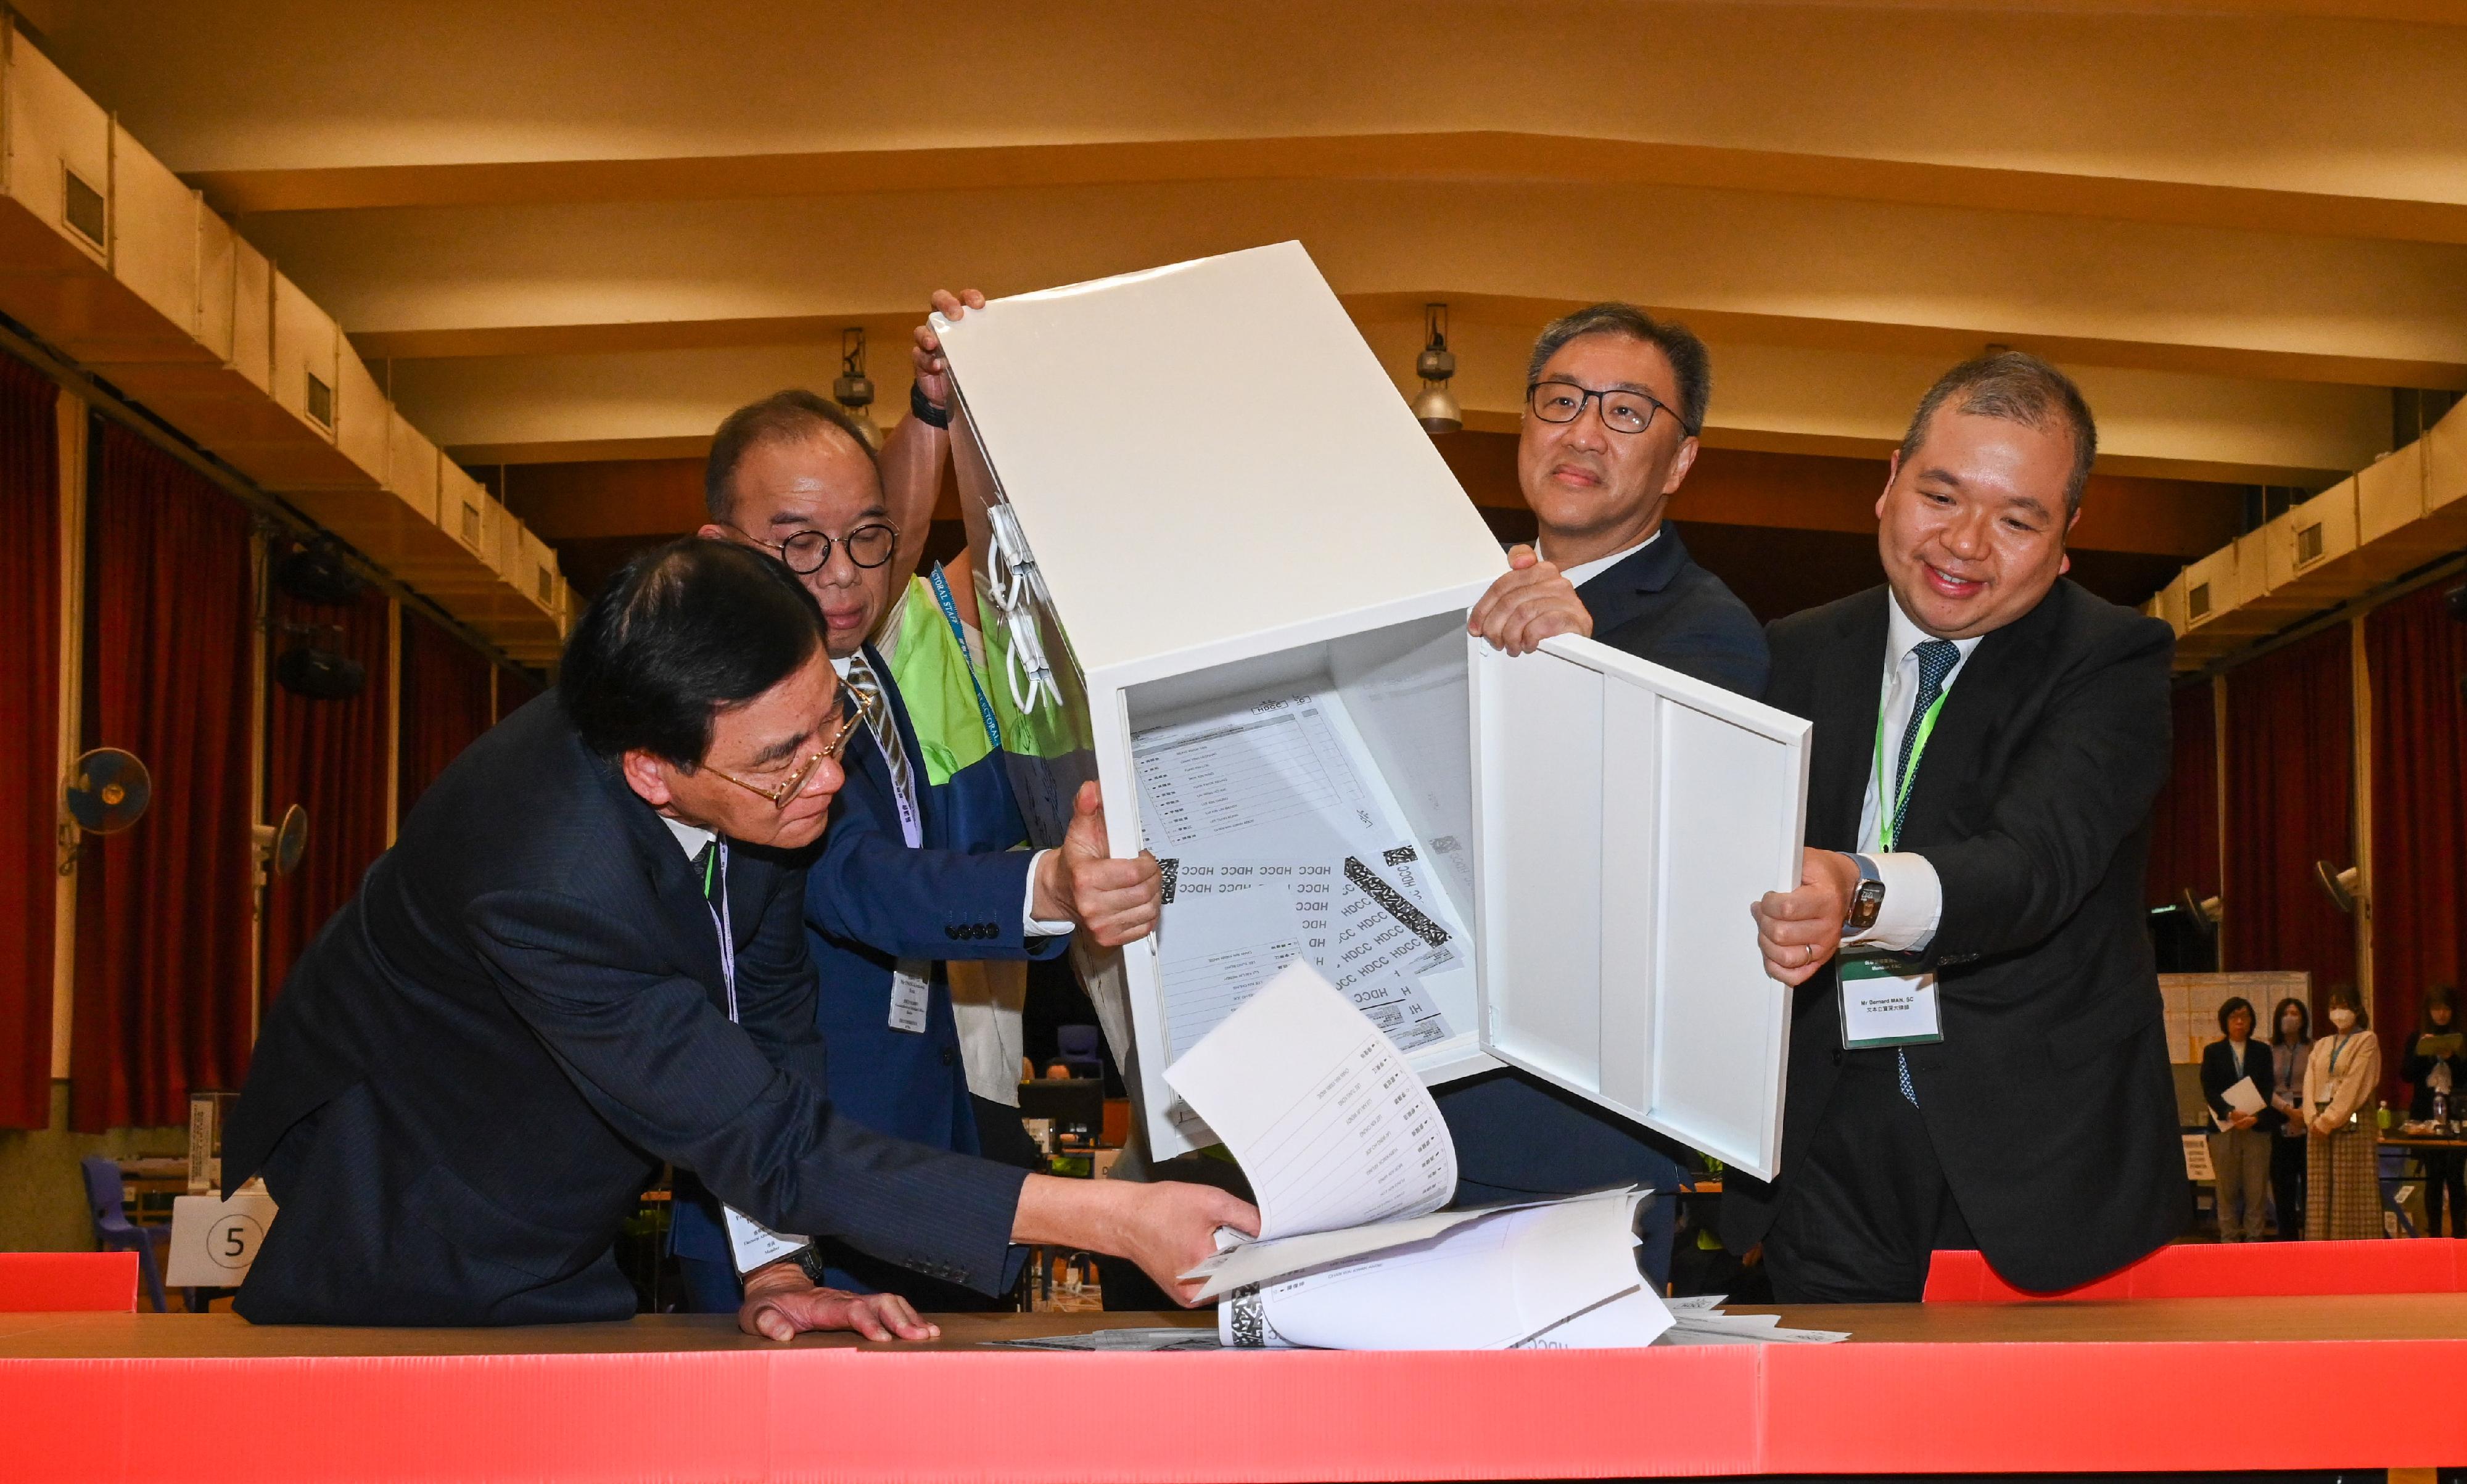 The Chairman of the Electoral Affairs Commission (EAC), Mr Justice David Lok (second right), and the Secretary for Constitutional and Mainland Affairs, Mr Erick Tsang Kwok-wai (second left), empty a ballot box at the District Committees constituency counting station of the 2023 District Council Ordinary Election at Ng Wah Catholic Secondary School last night (December 10). Also present are the EAC members Professor Daniel Shek (first left) and Mr Bernard Man, SC (first right).